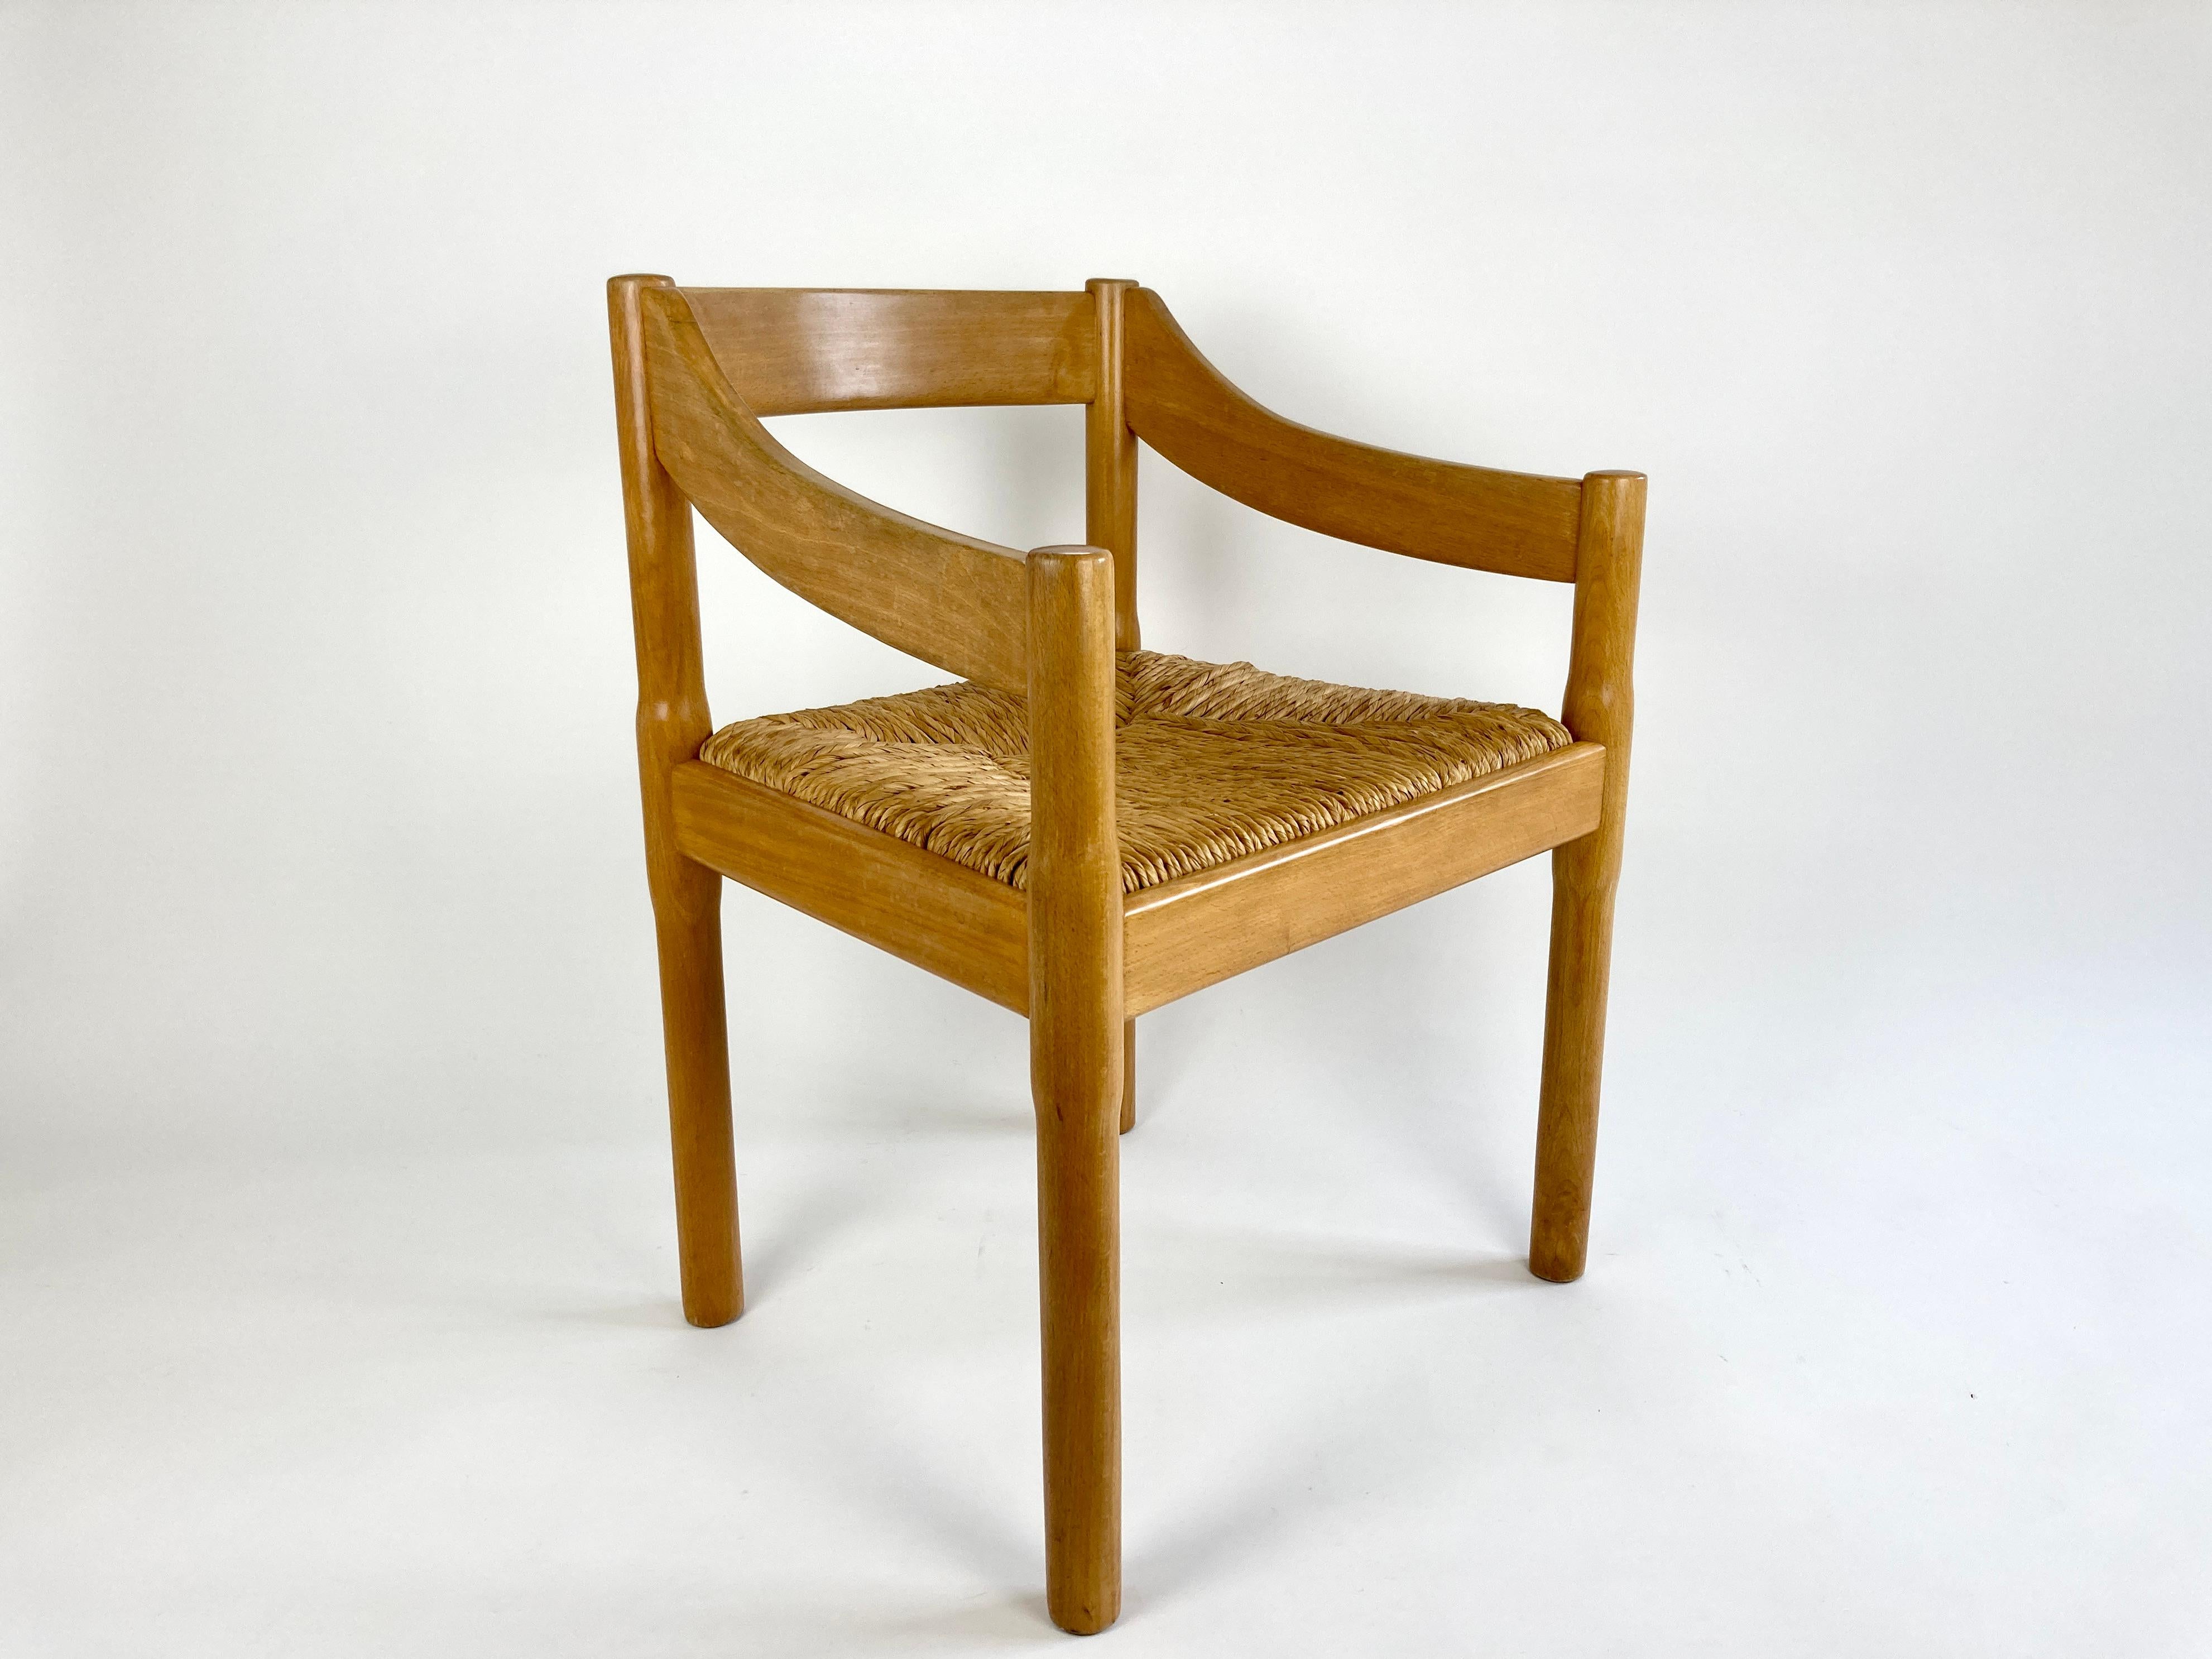 Italian Carimate Carver Dining Chair by Vico Magistretti